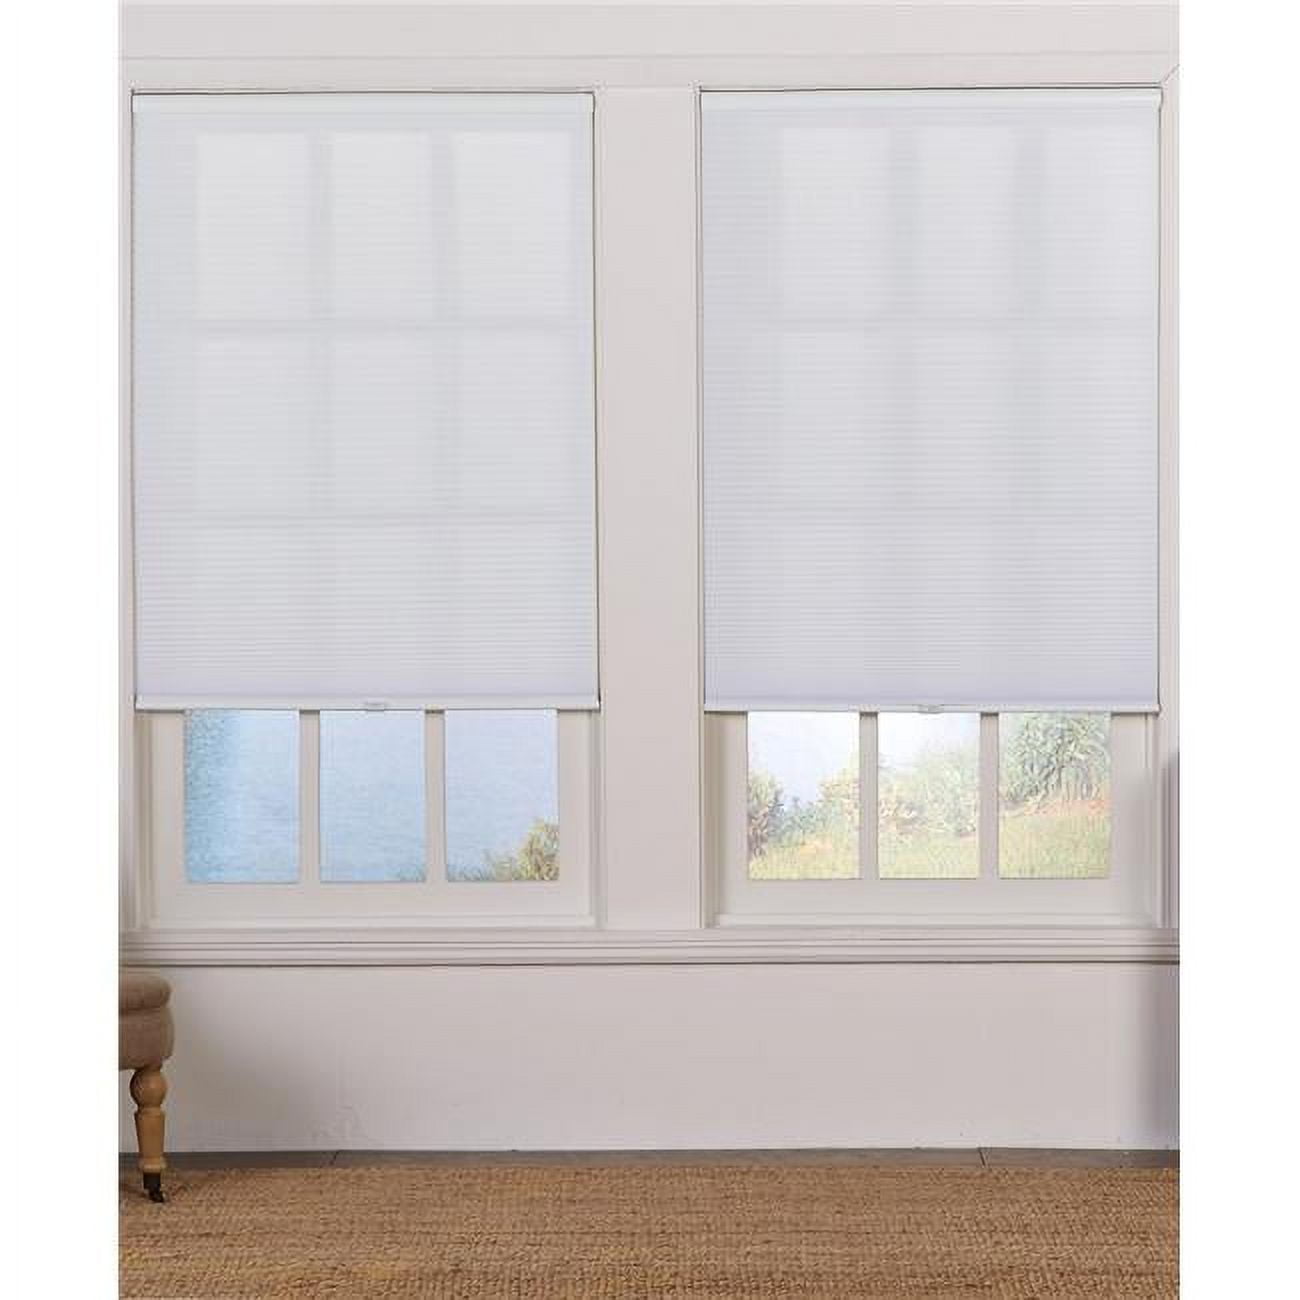 Ubc29x64wt Cordless Light Filtering Cellular Shade, White - 29 X 64 In.